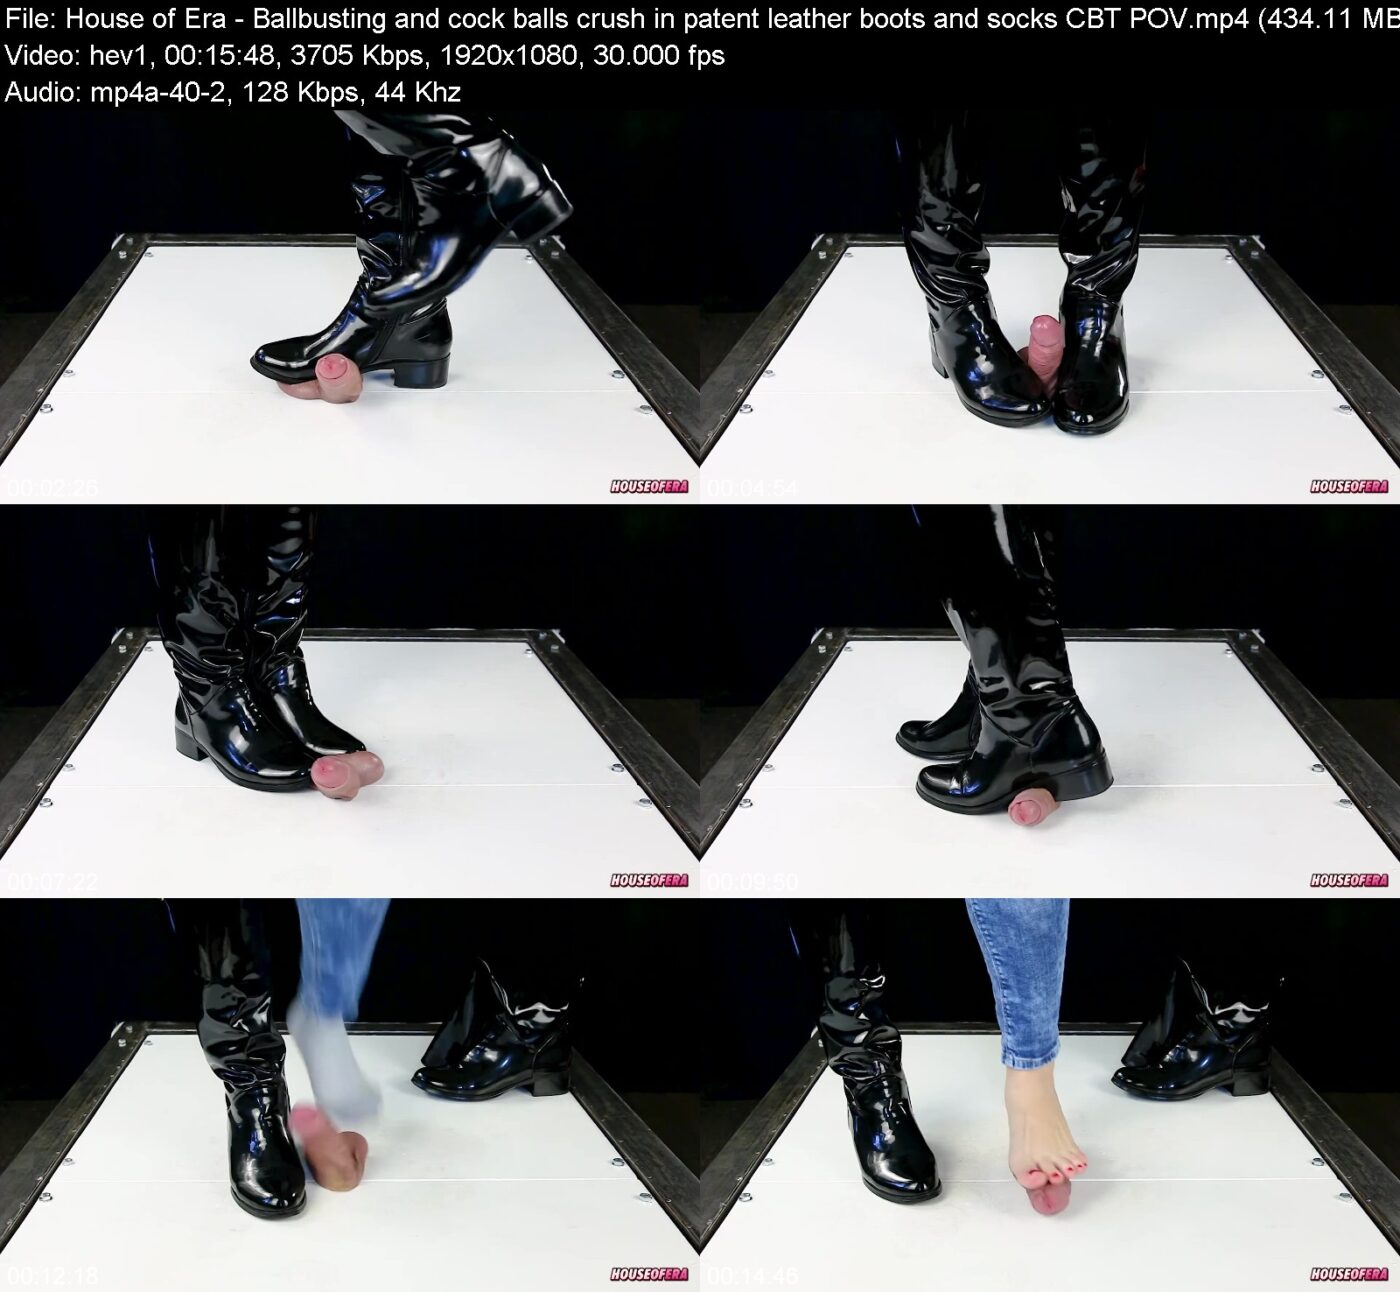 Actress: House of Era. Title and Studio: Ballbusting and cock balls crush in patent leather boots and socks CBT POV